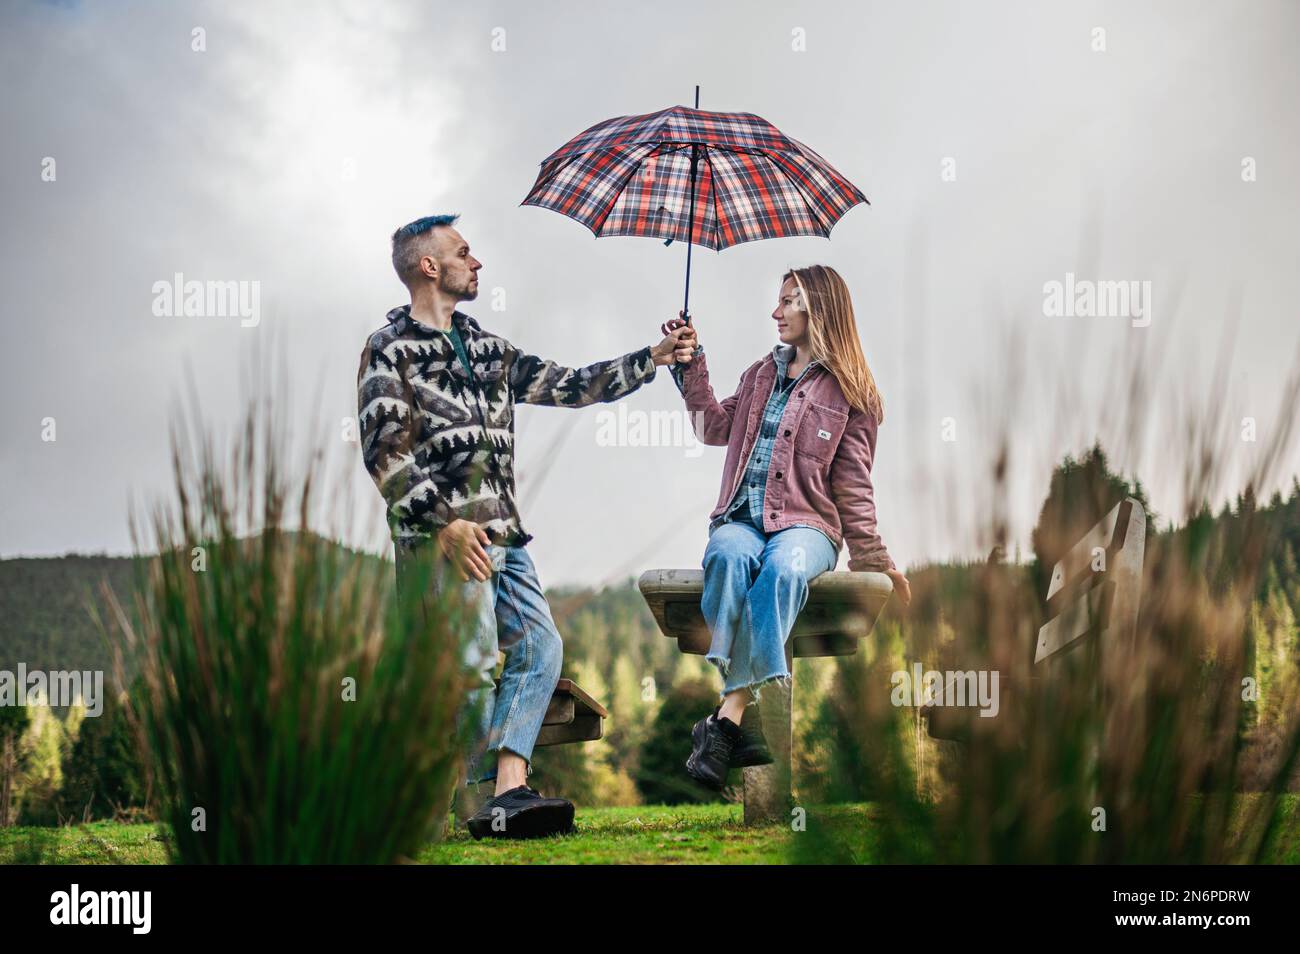 Loving couple sits on a bench with the man holding a patterned umbrella above the woman Stock Photo